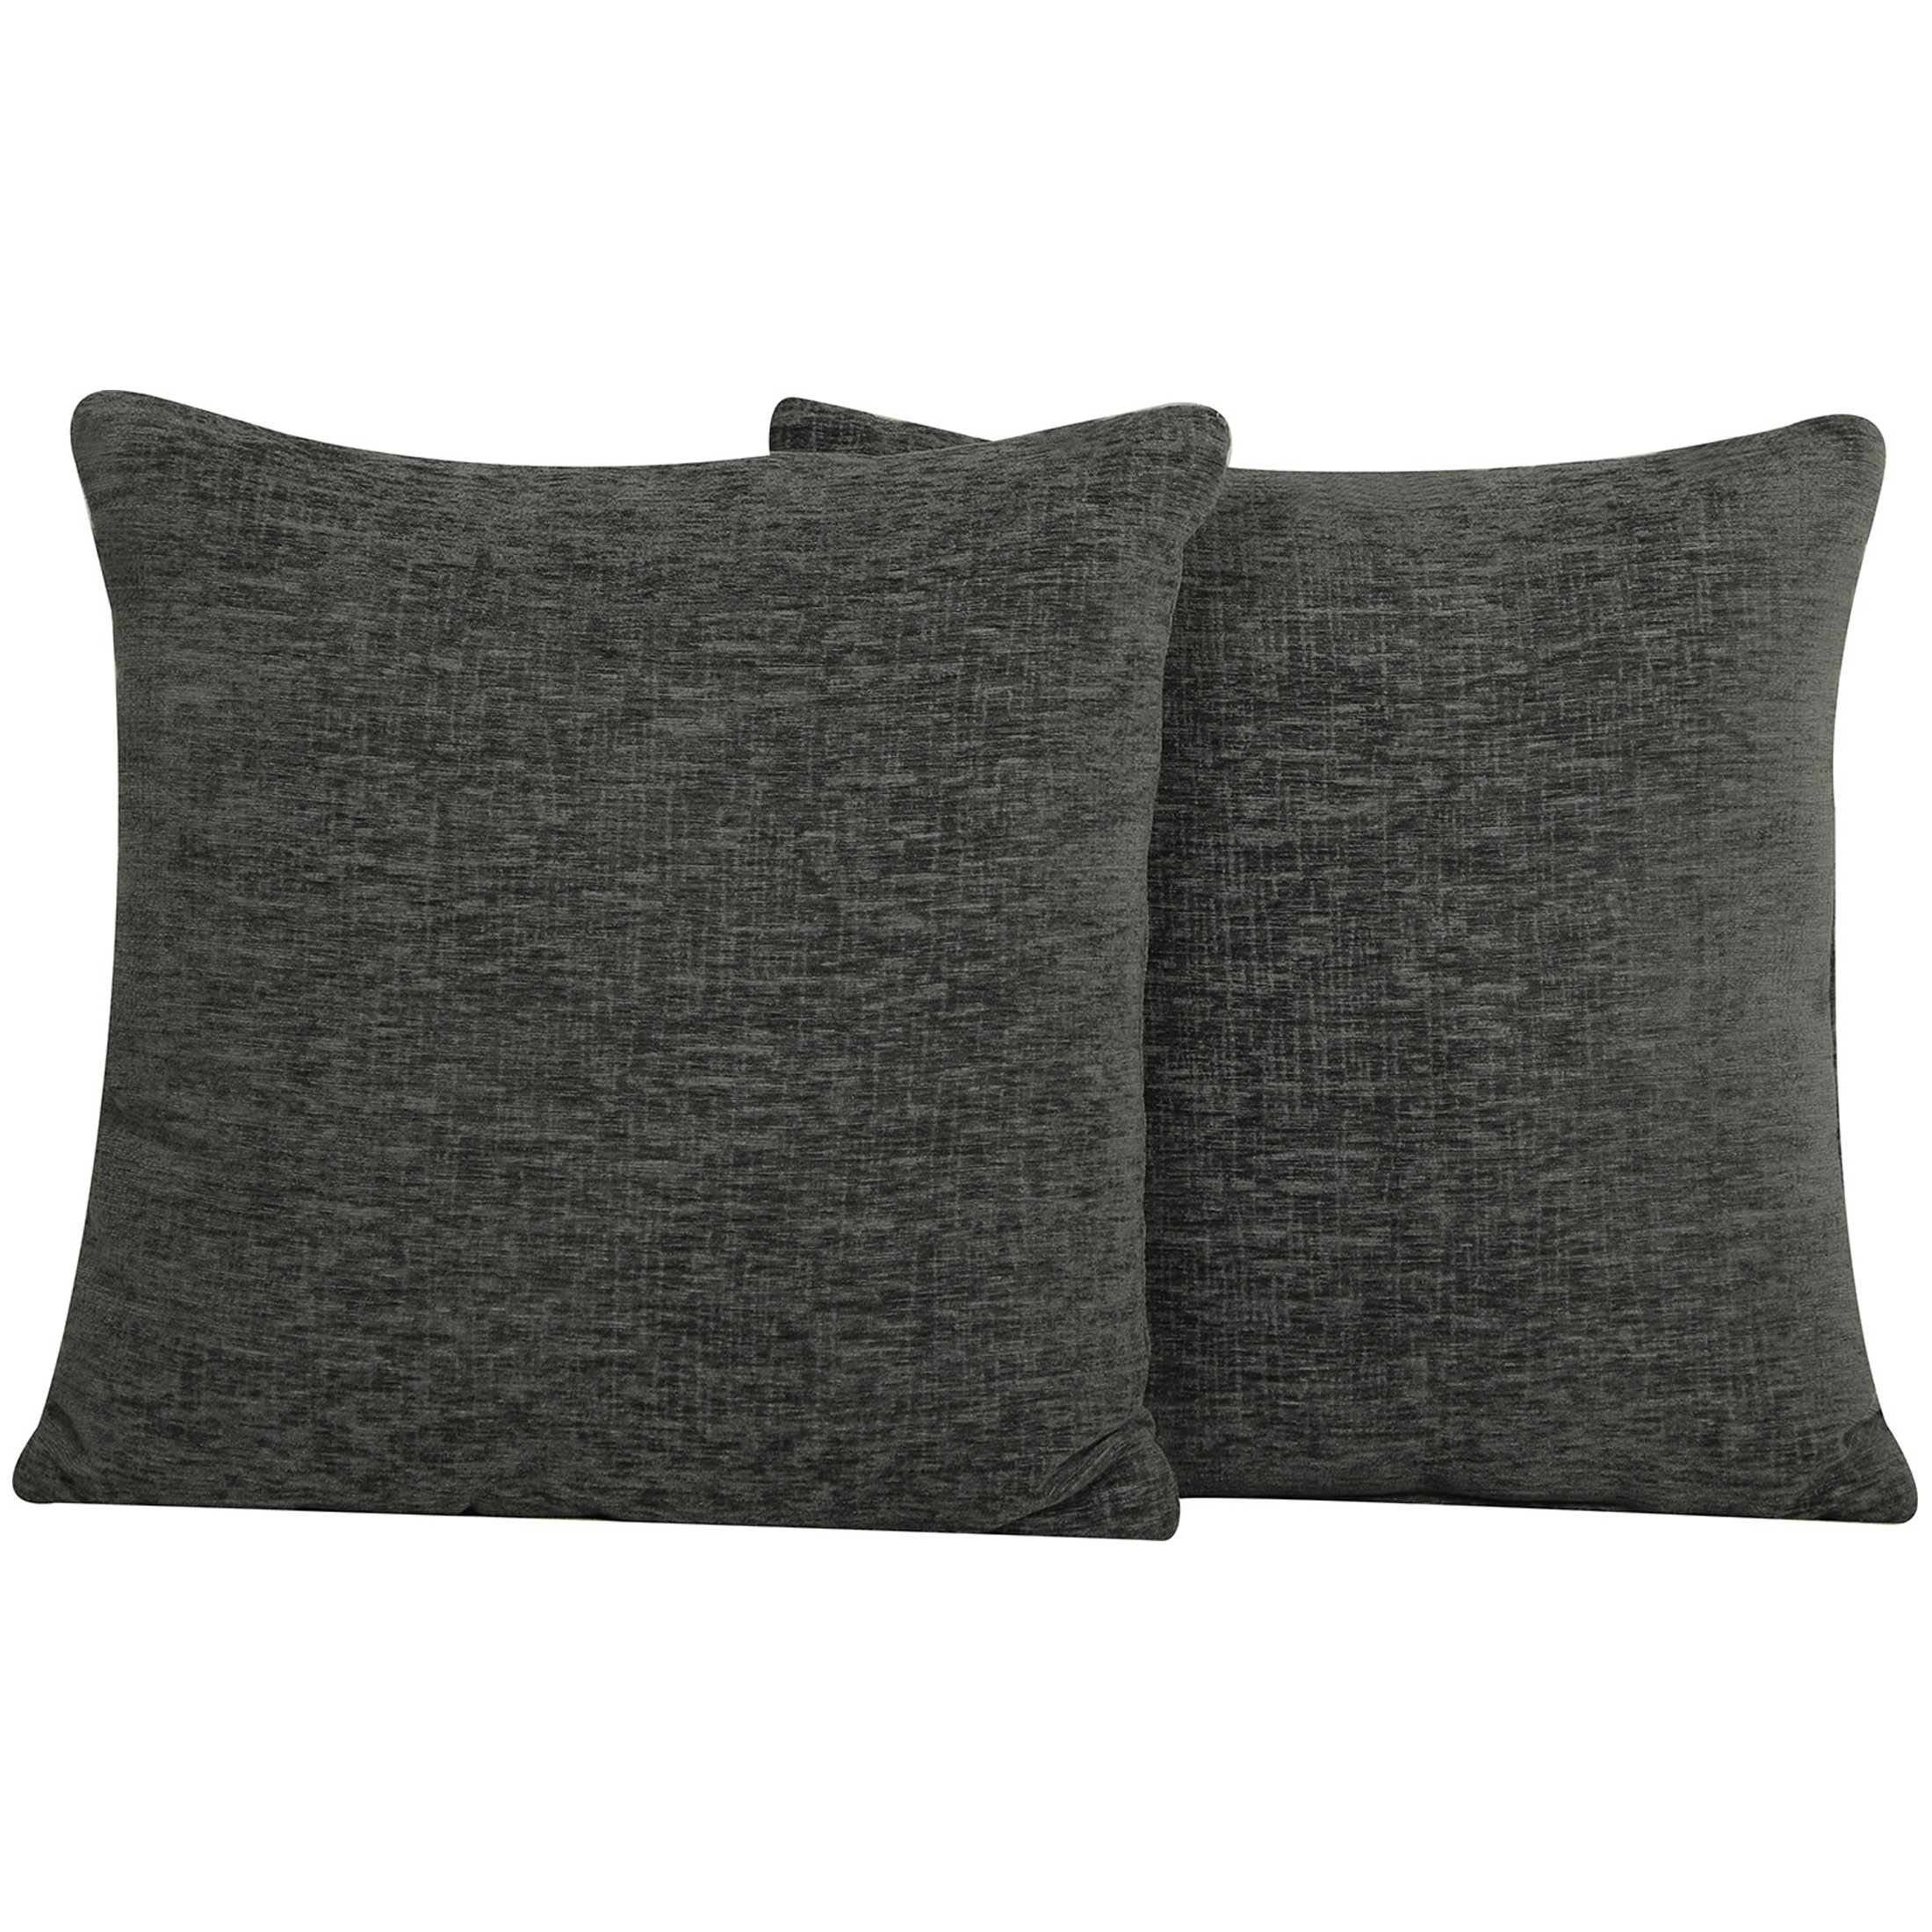 Mainstays Chenille Square Grey Pillow 18''x18'', 2 Pack - image 1 of 5